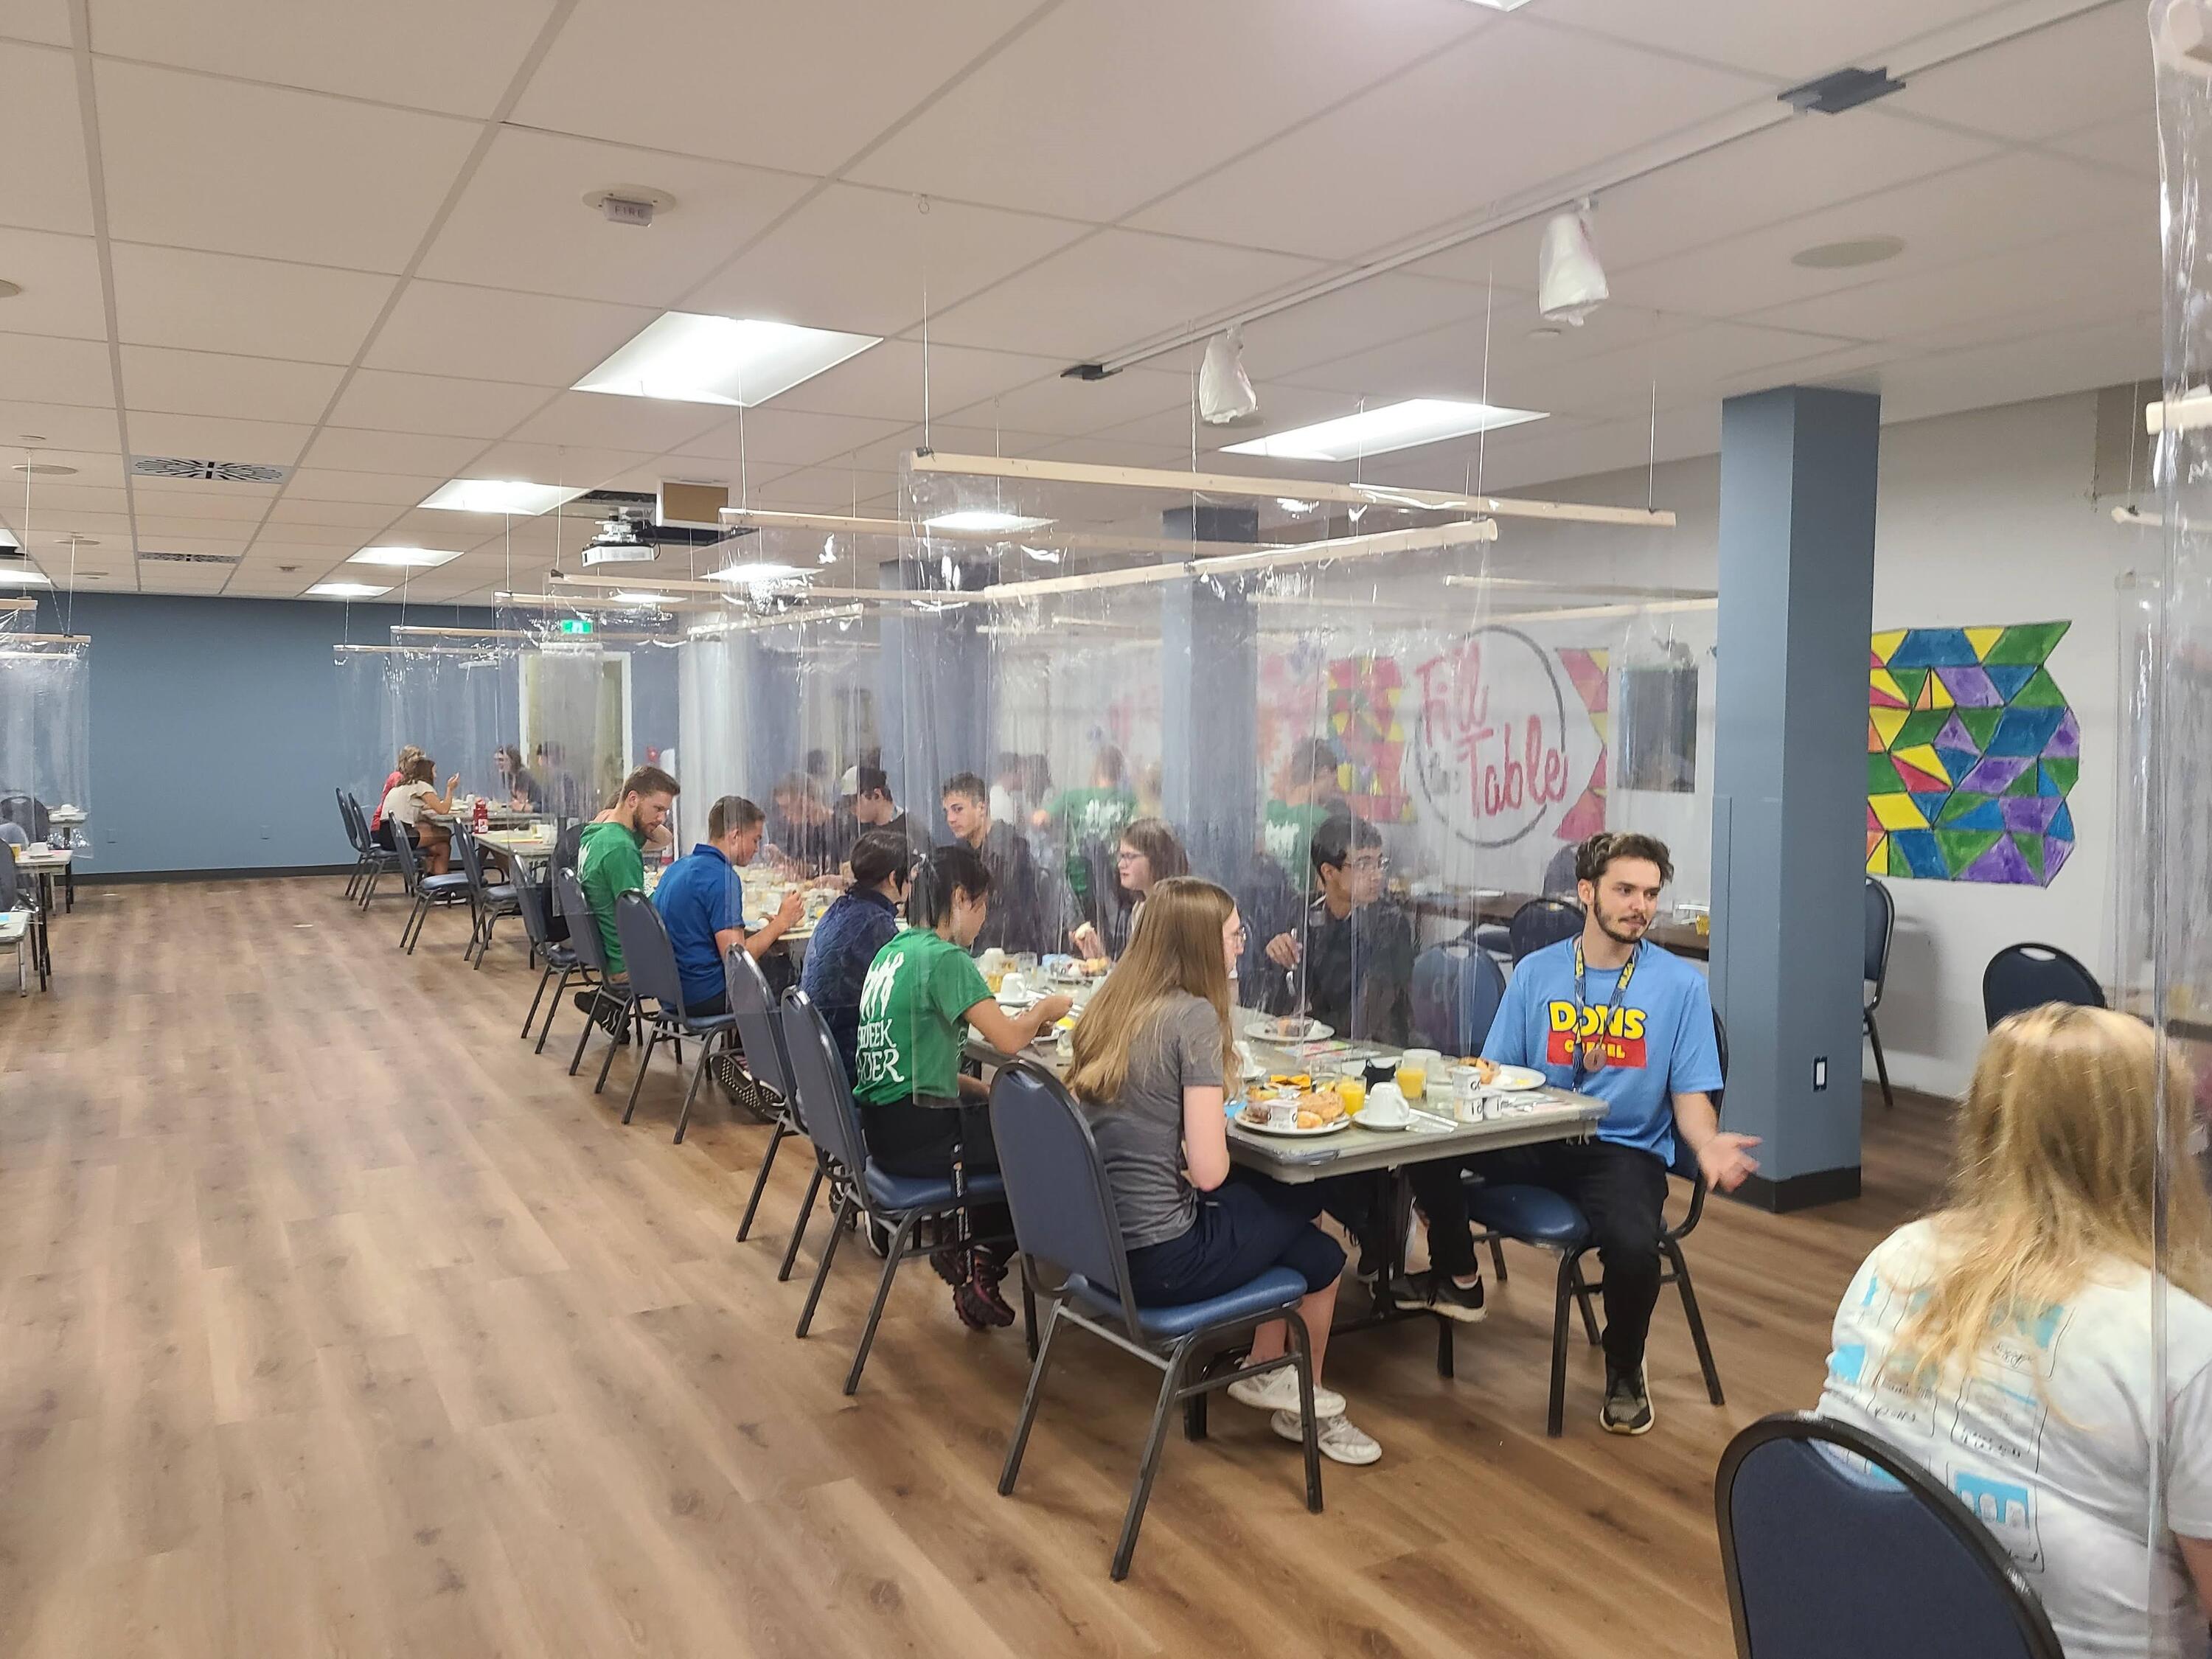 Students enjoy eating together in the new dining room, set up with plastic barriers for COVID prevention 